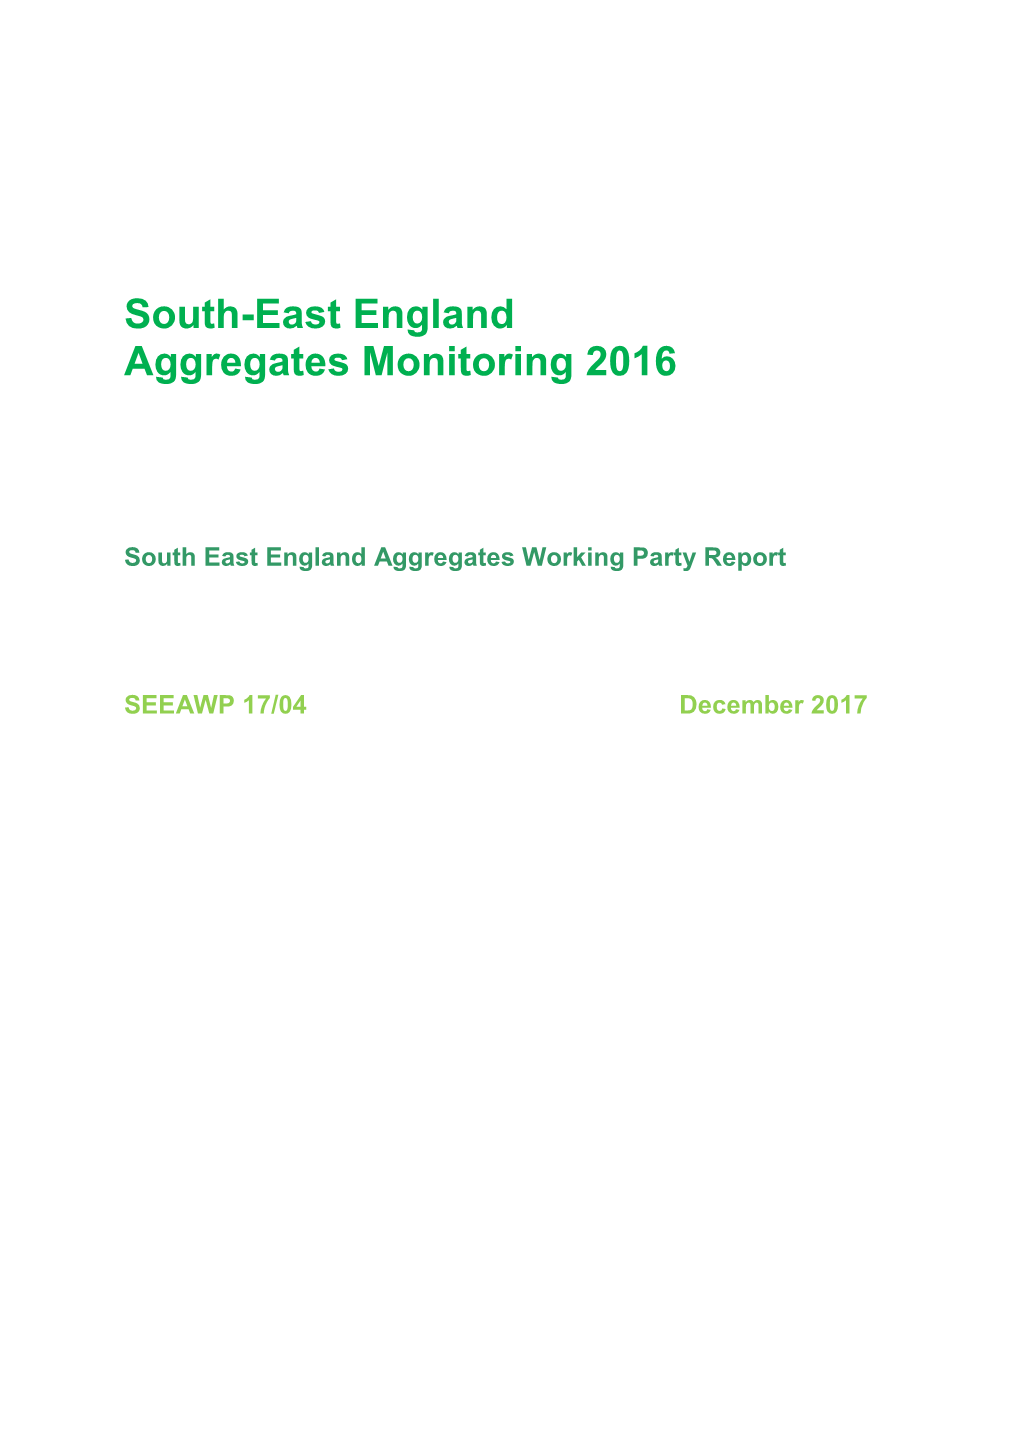 South-East England Aggregates Monitoring 2016